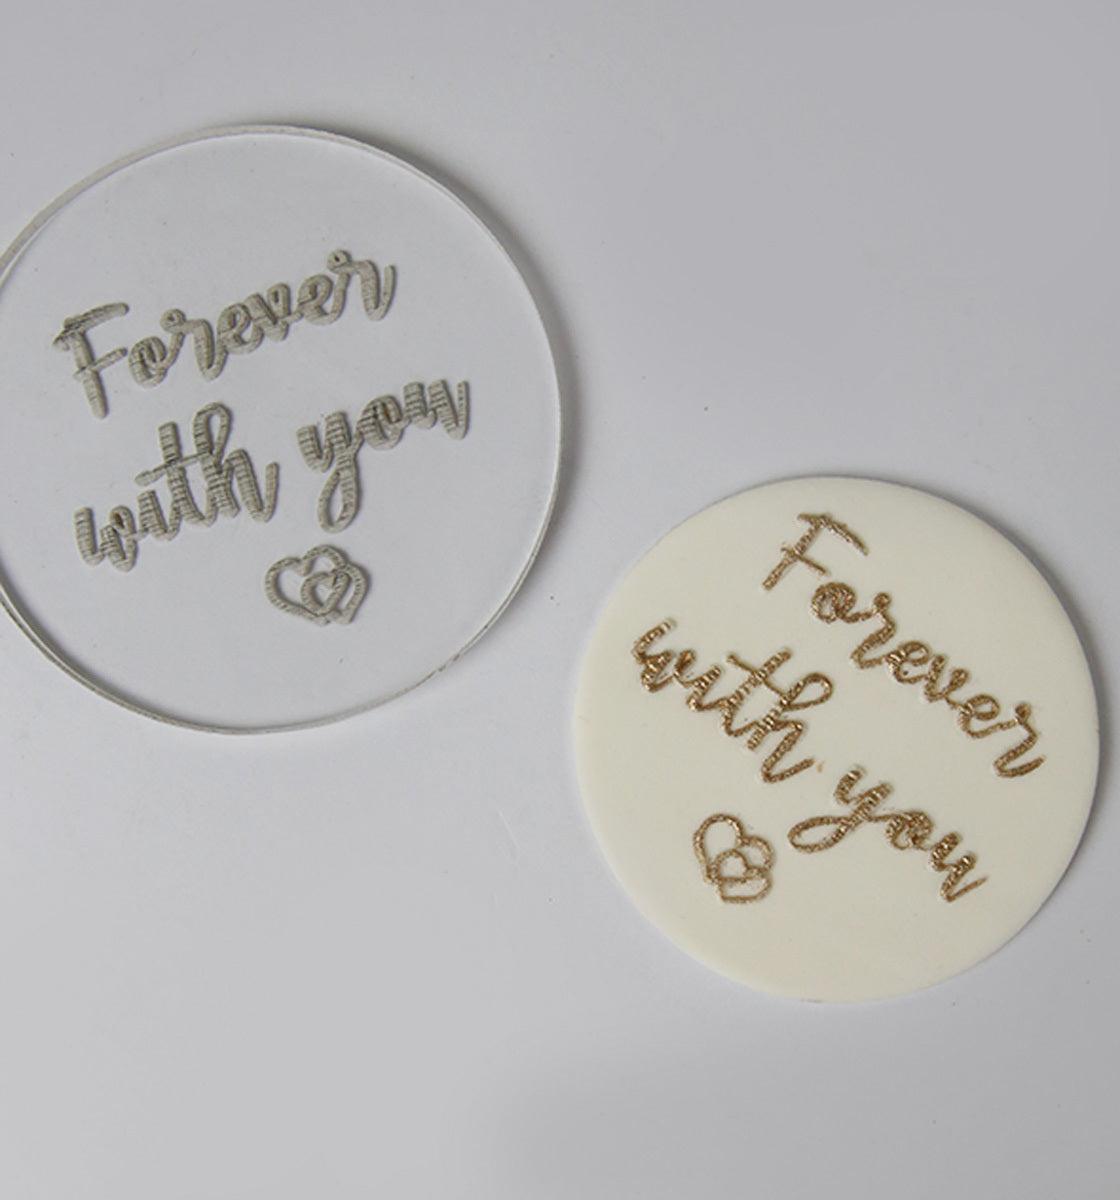 Forever With You - Embosser Stamp - Inspired Baking Pakistan